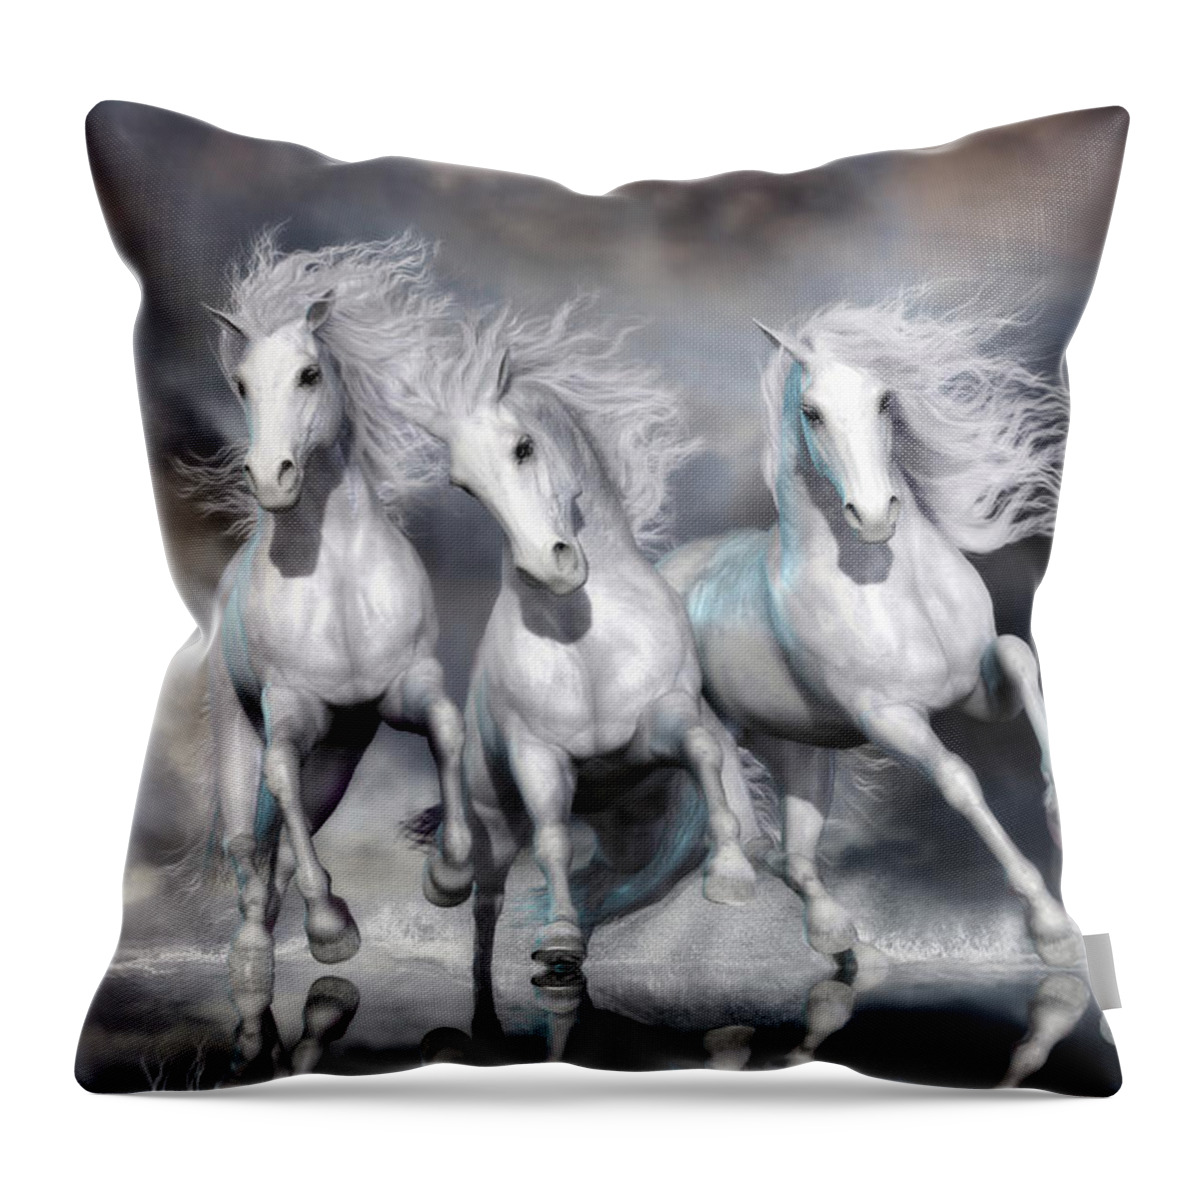 Galloping Horses Throw Pillow featuring the digital art Trinity Galloping Horses Blue by Shanina Conway